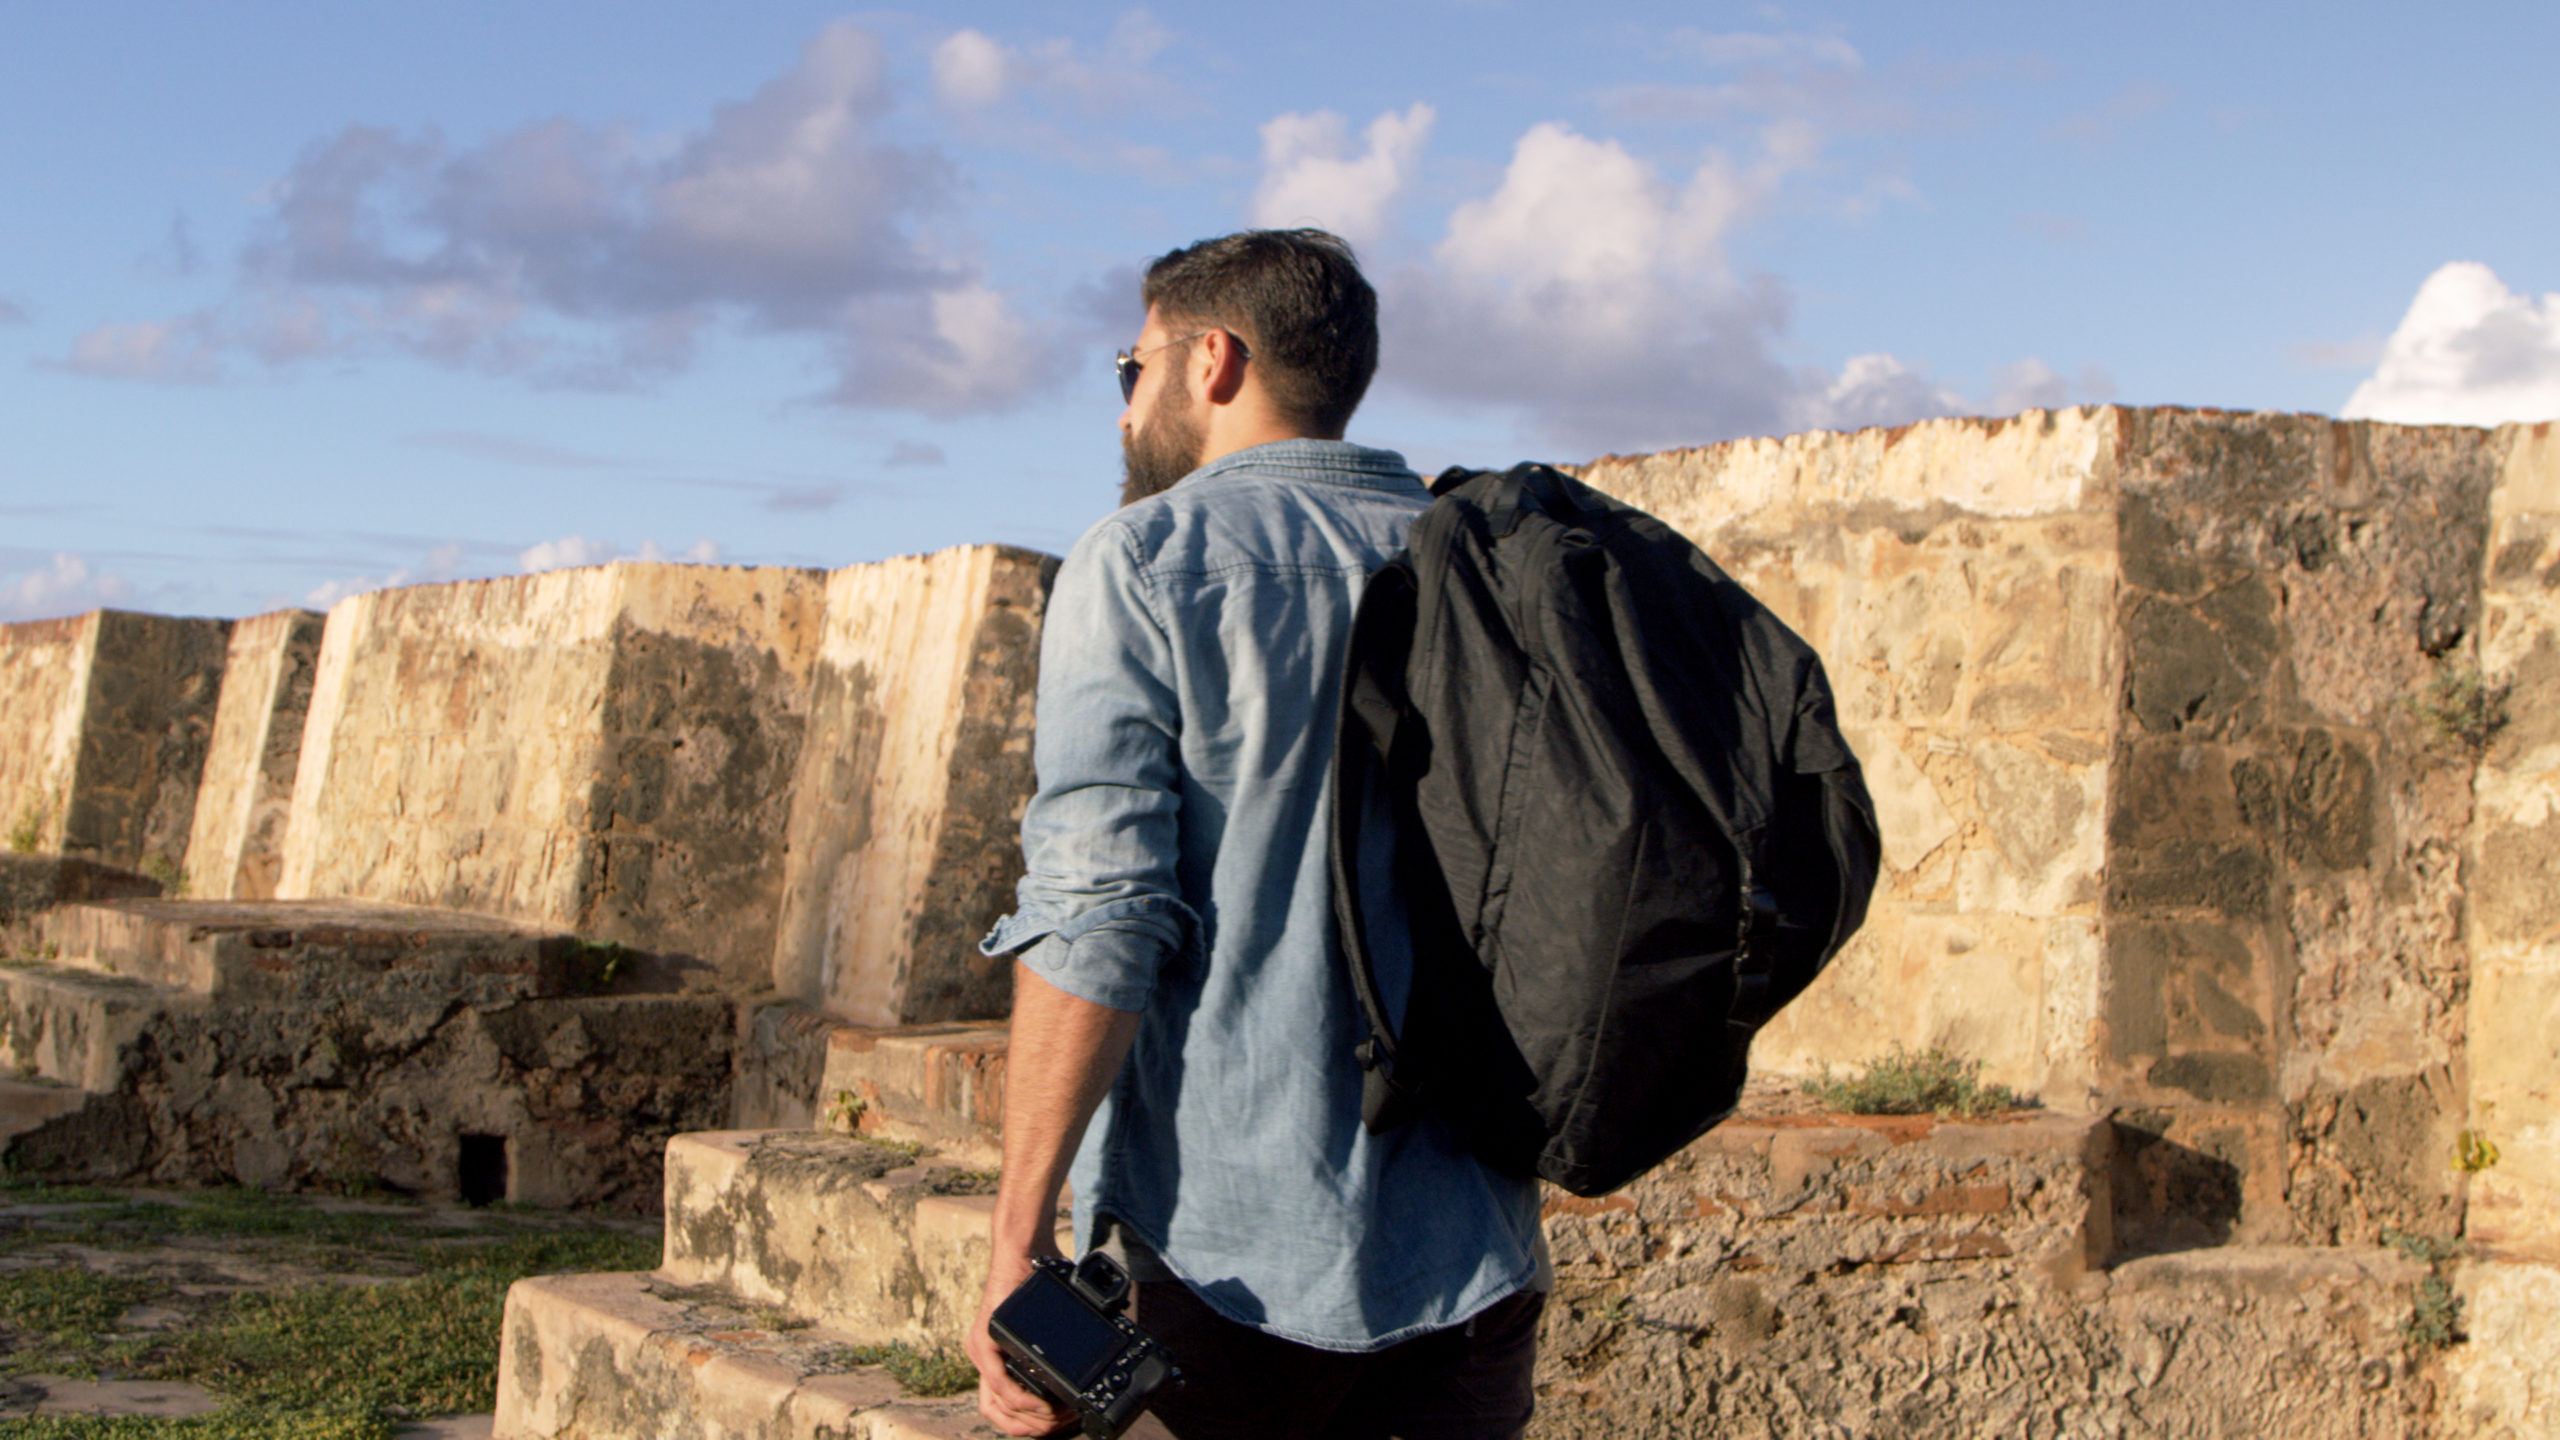 Blackmile Closeup view from behind of a man wearing a jean shirt and black backpack holding a camera looking out of the stone walls